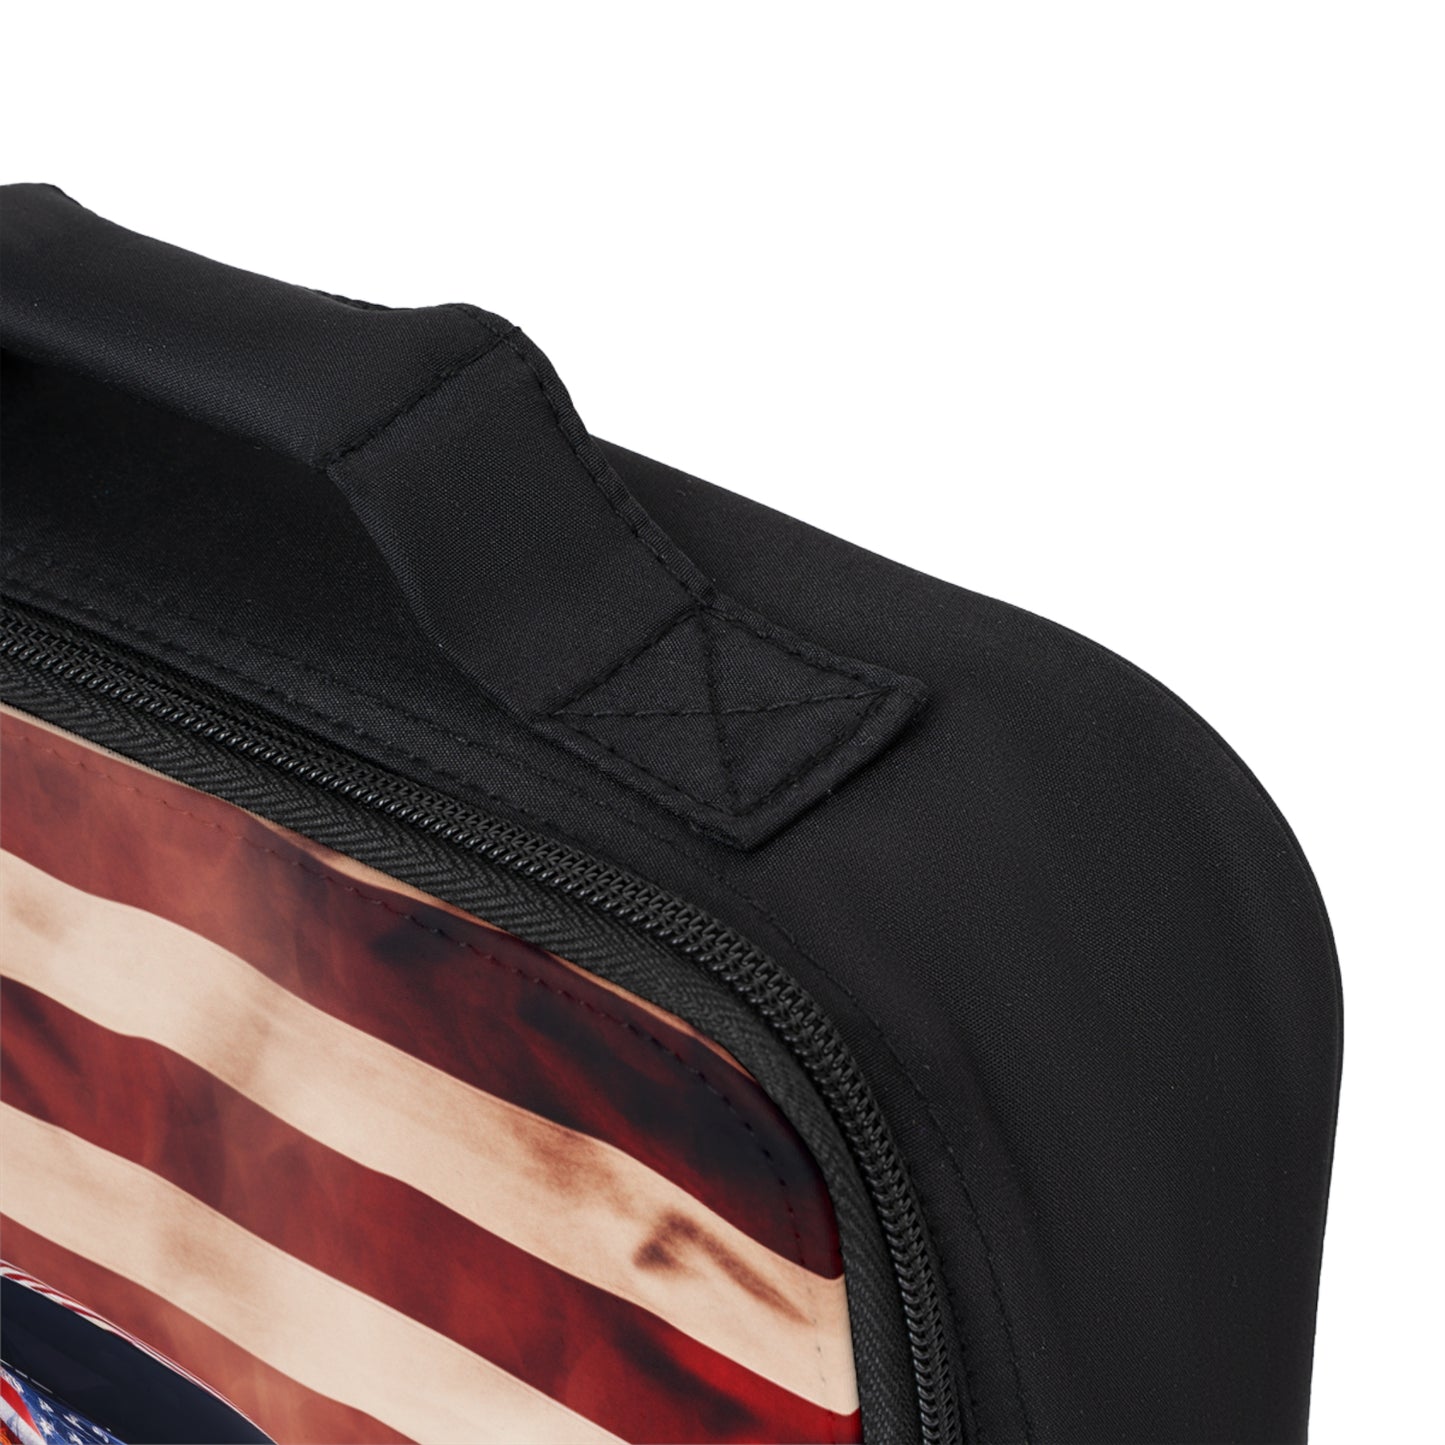 Lunch Bag Abstract American Flag Background Bugatti 2